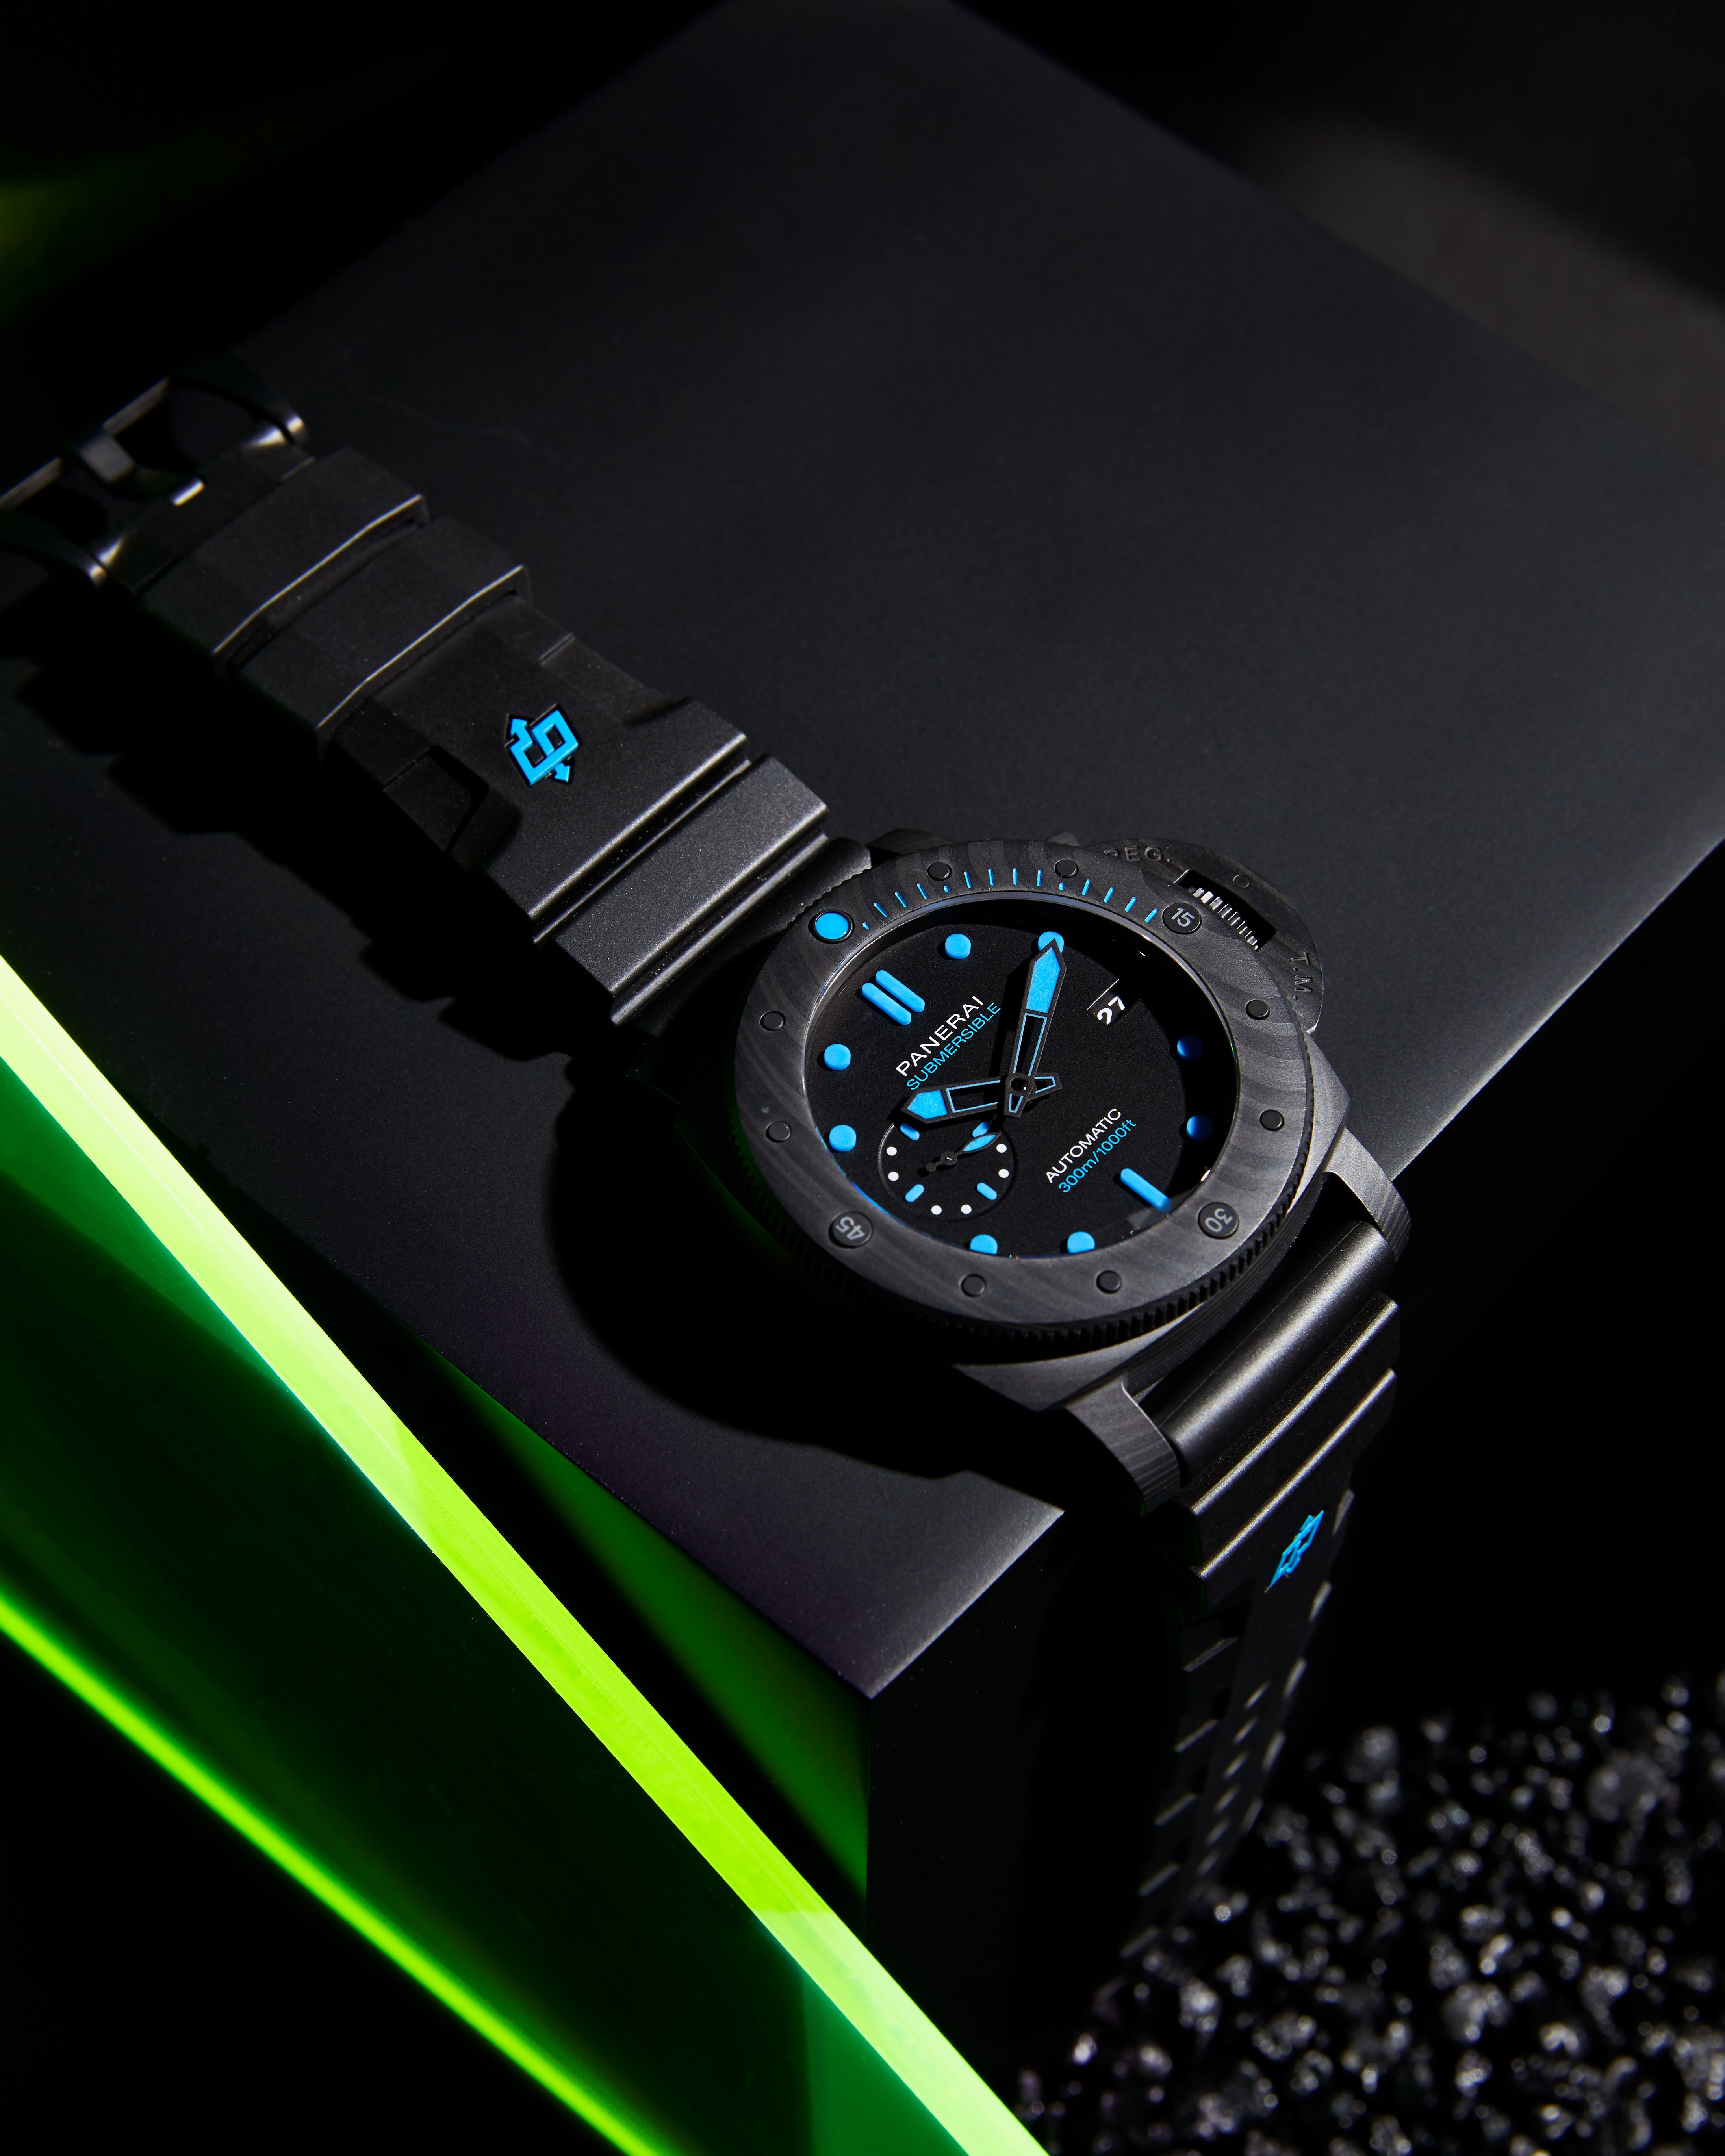 Diving In Style With the Panerai Submersible Carbotech Watch